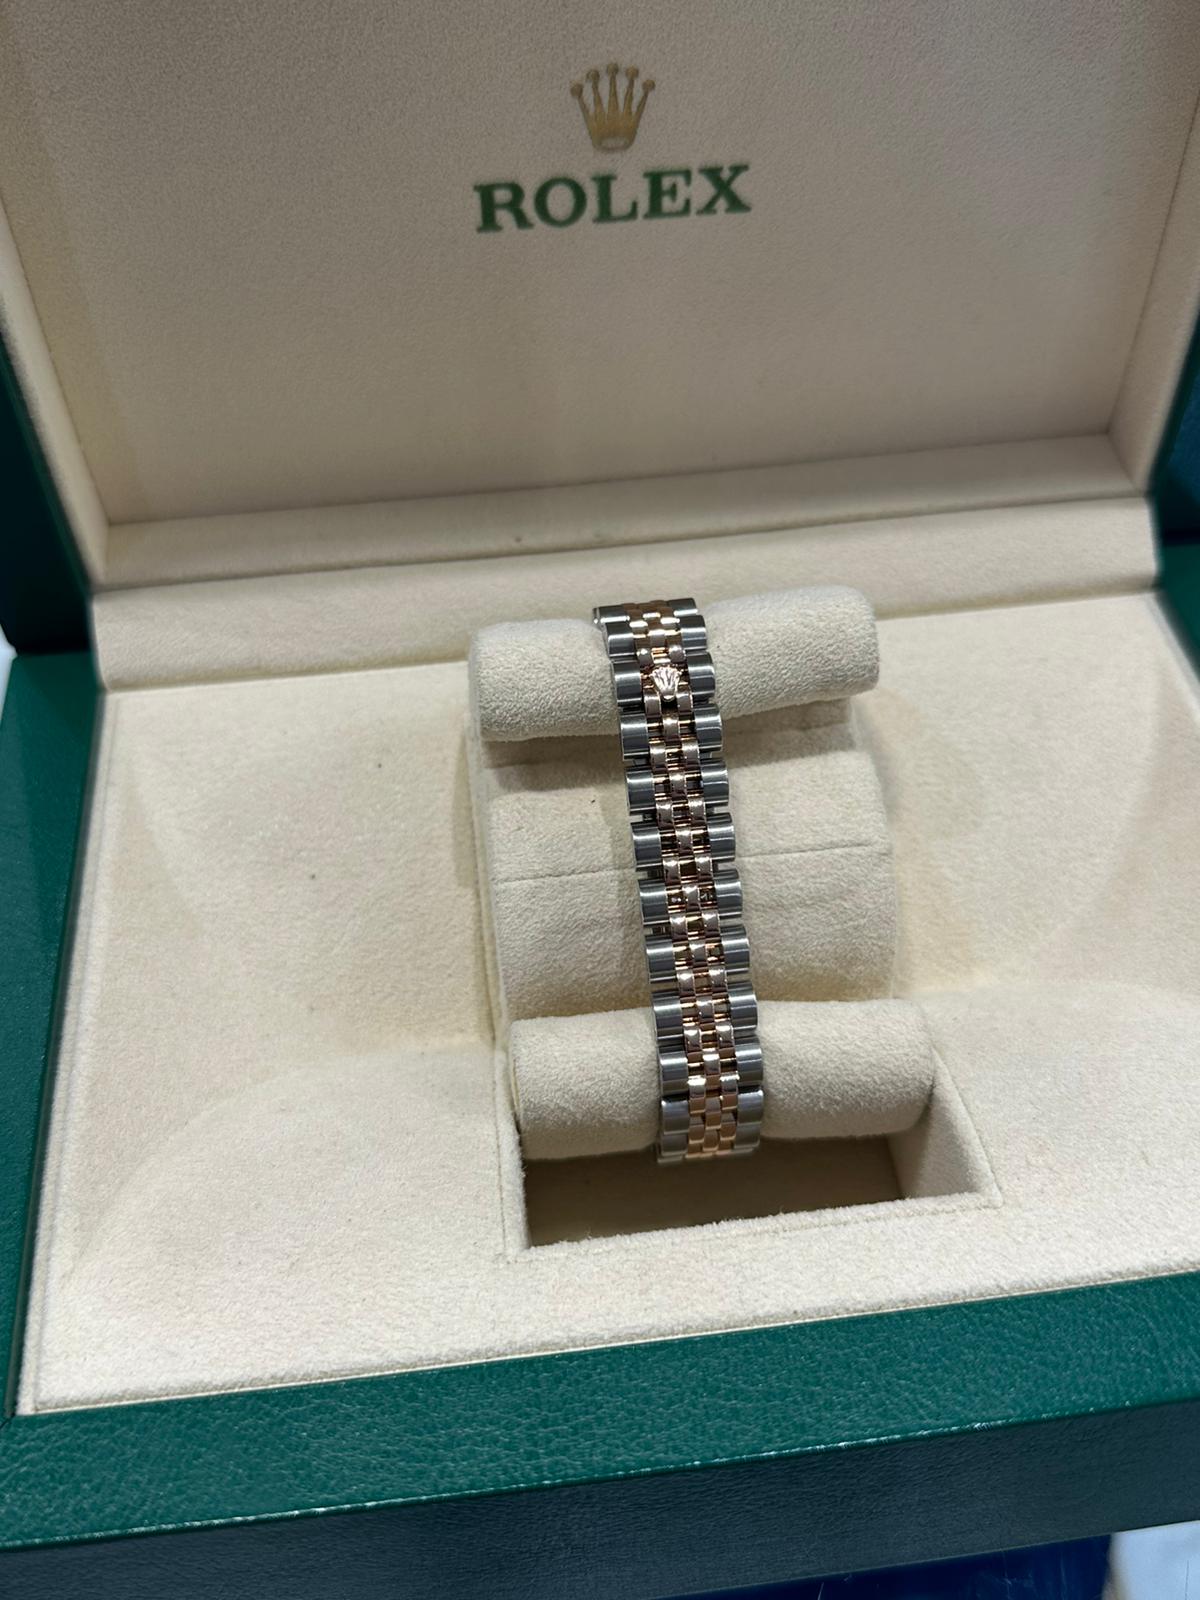 Rolex Datejust 26mm steel and rose gold - 179171 2 - Image 8 of 10